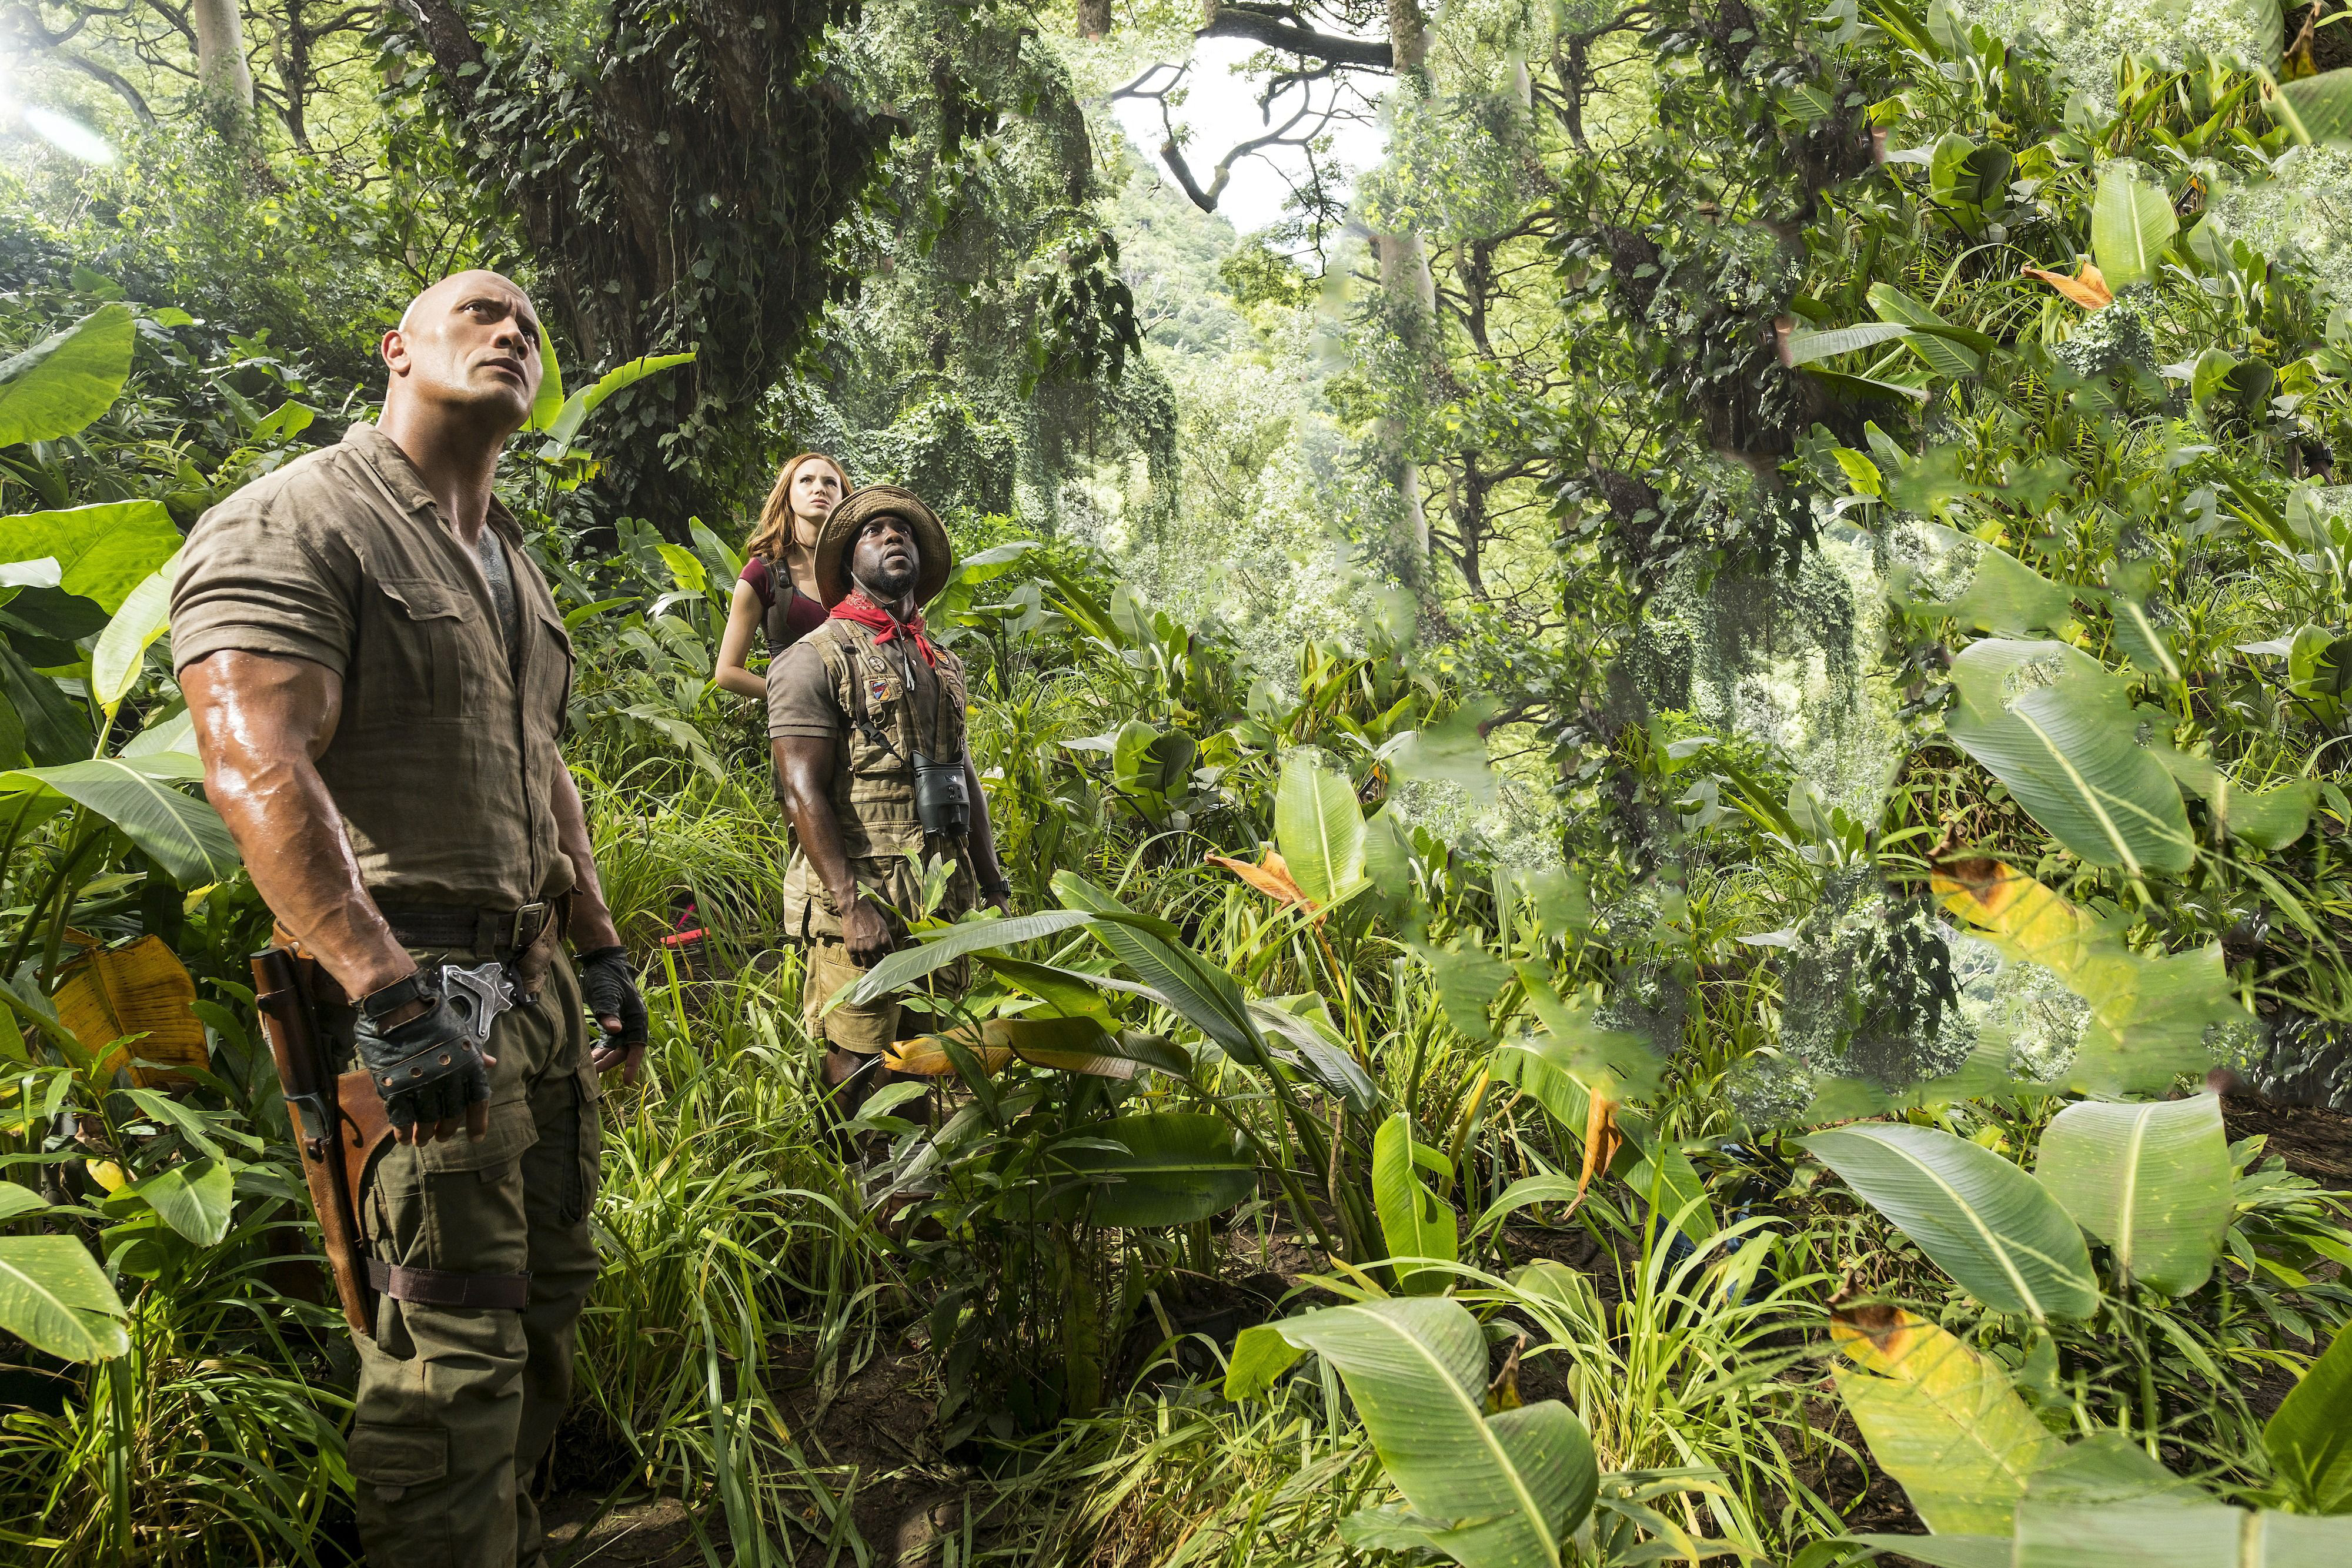 download the last version for android Jumanji: Welcome to the Jungle